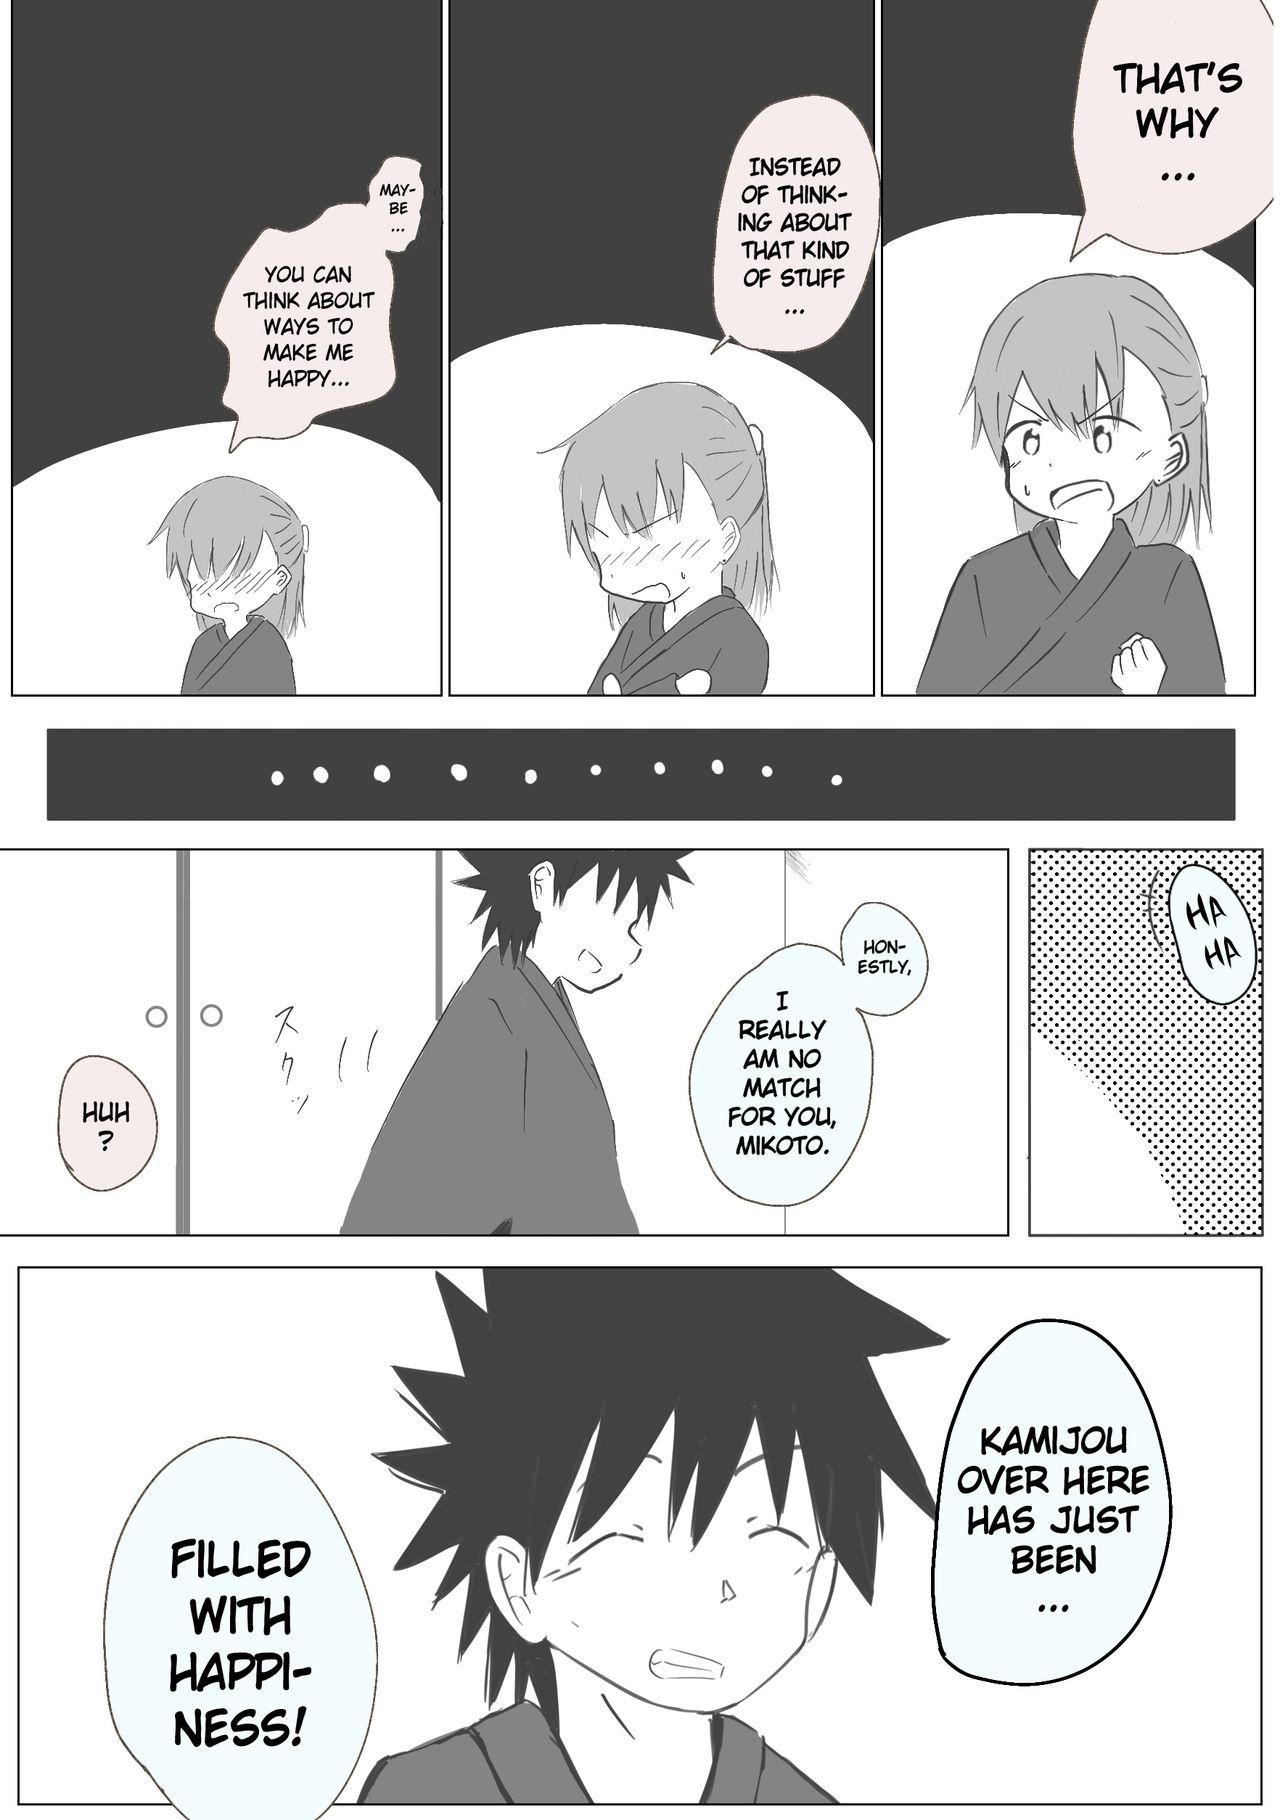 Hot Couple Sex Kamikoto's First Night as Newlyweds - Toaru majutsu no index | a certain magical index Old Vs Young - Page 5